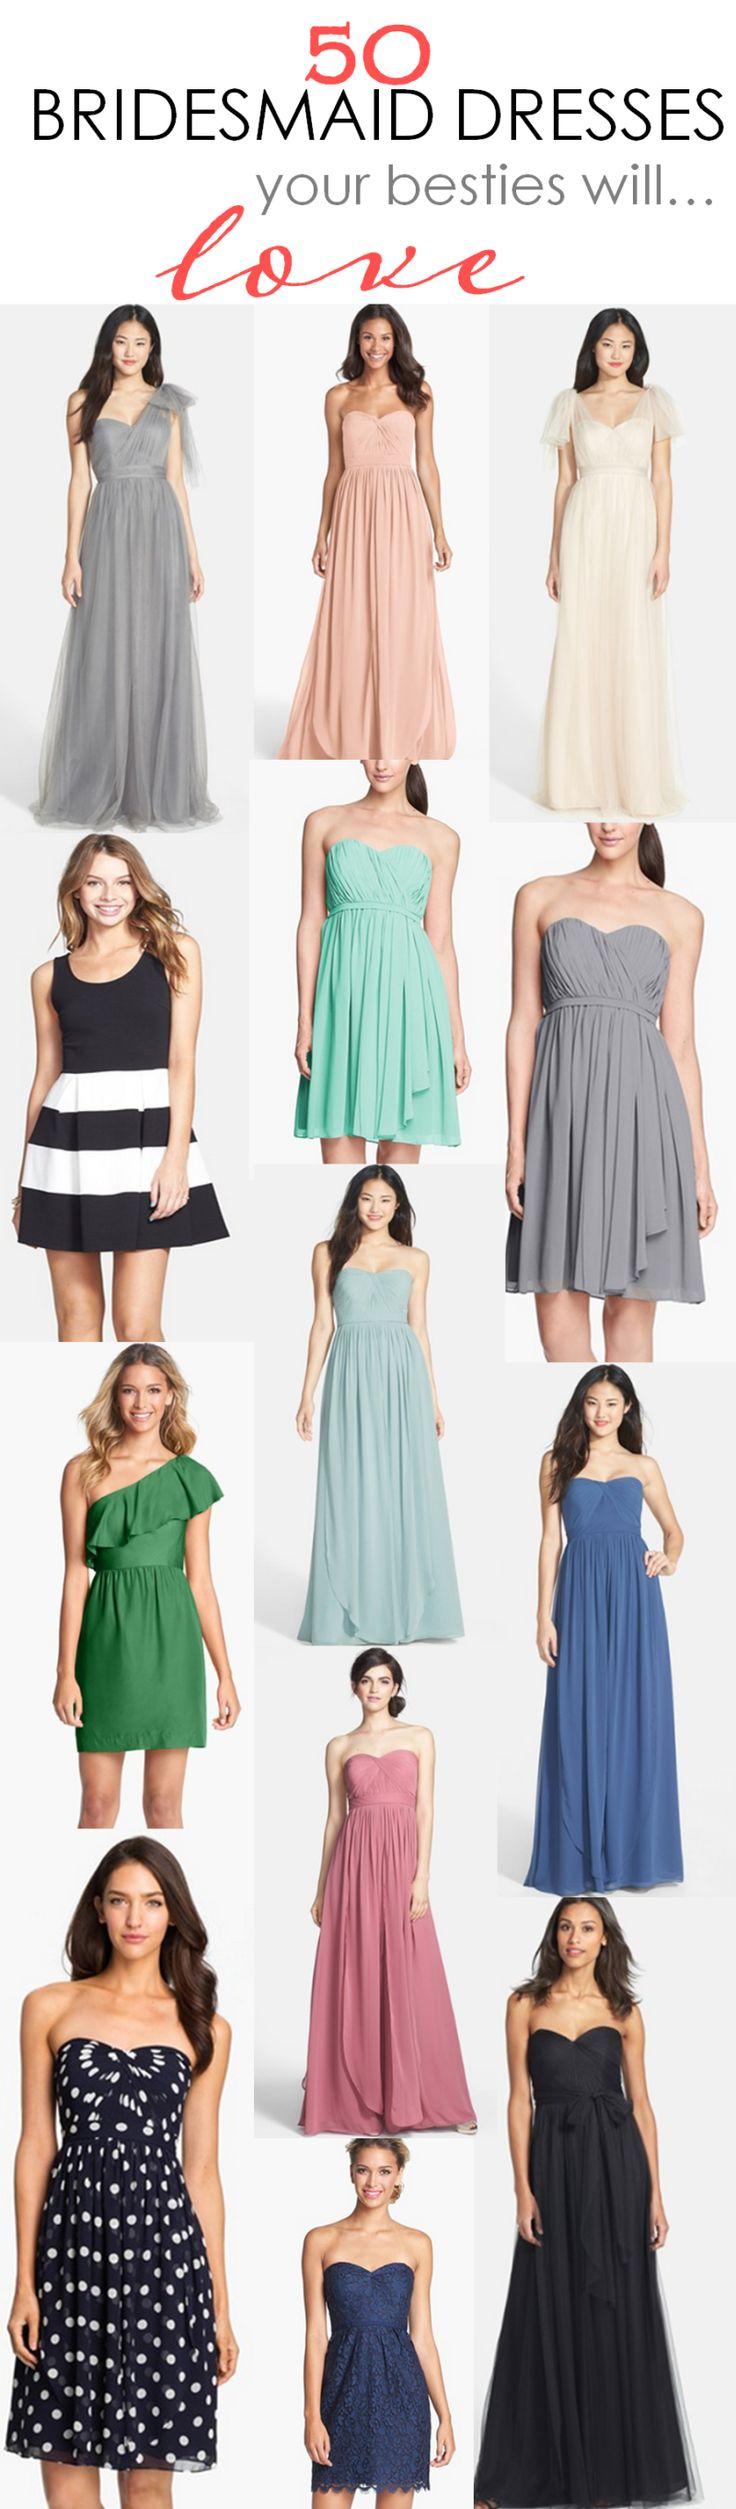 Mariage - 50 Bridesmaid Dresses Your Besties Will Love!